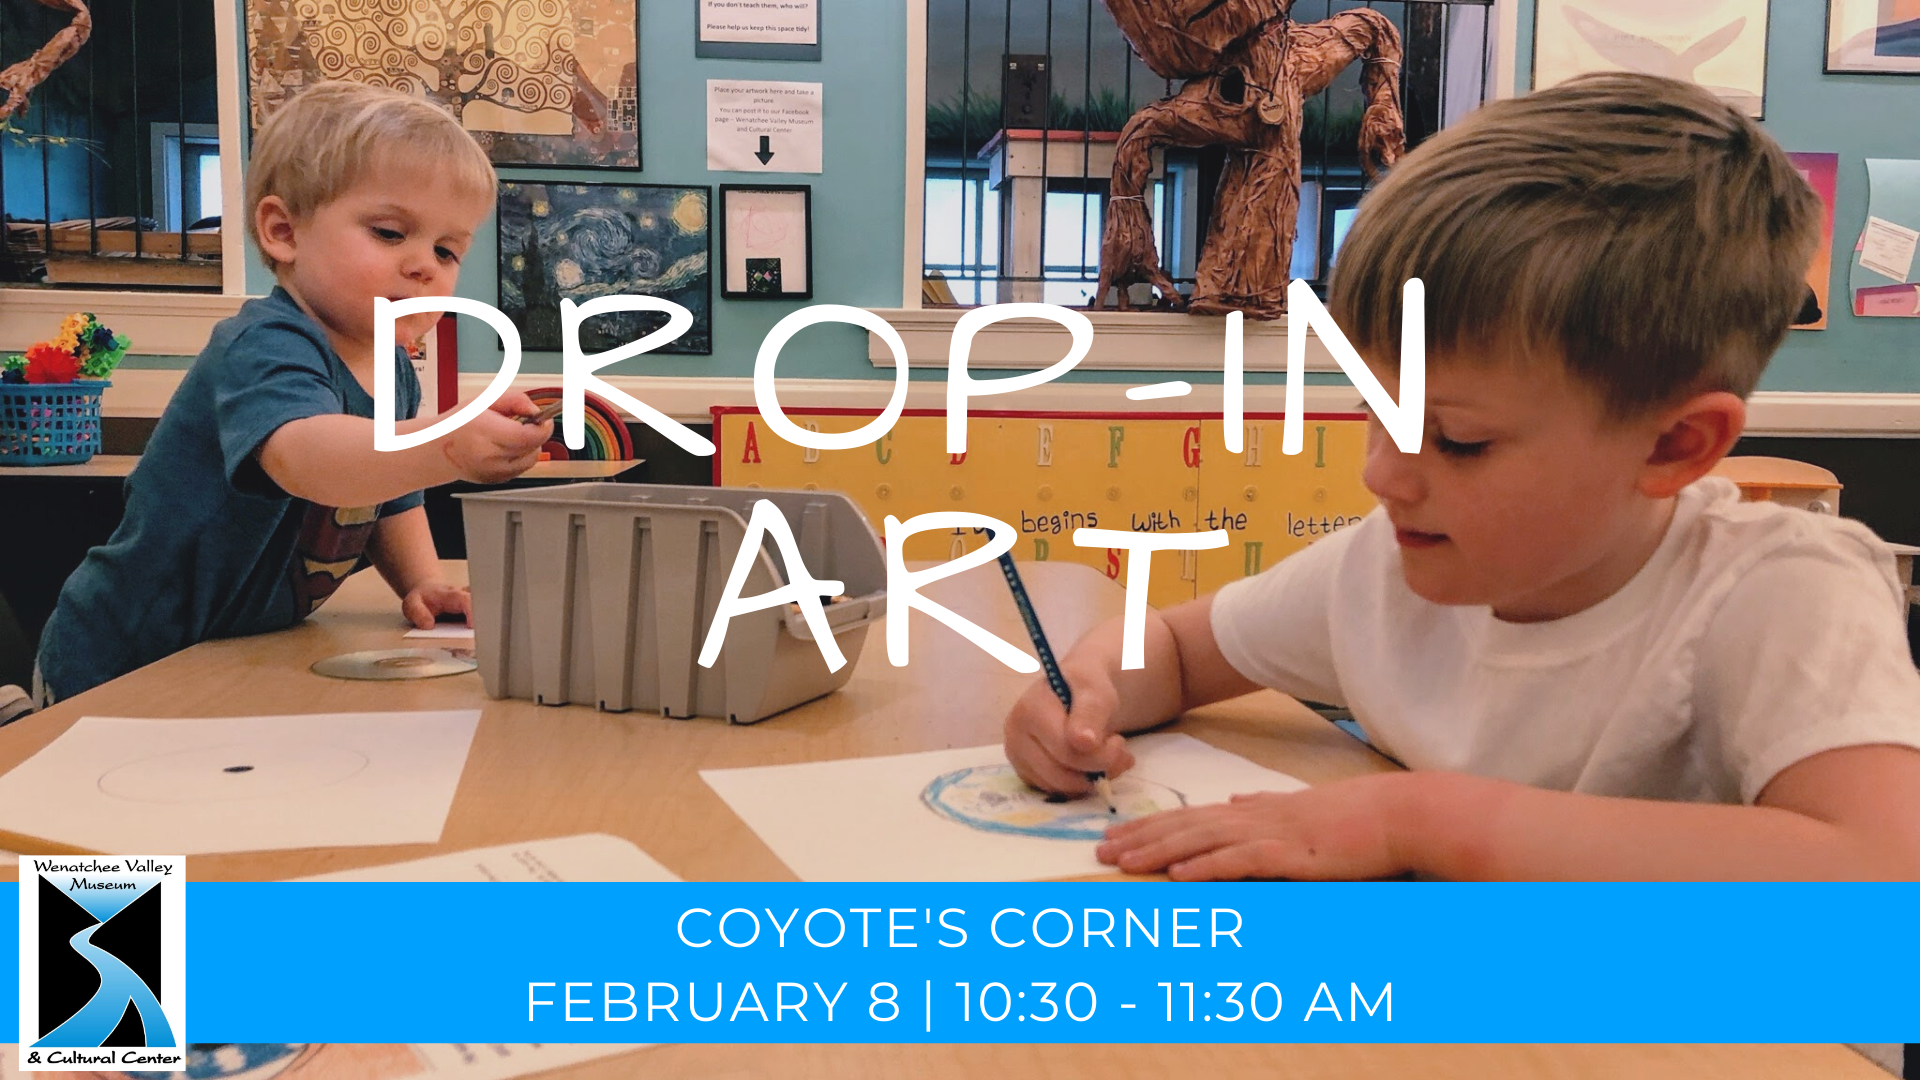 Join us for a drop-in art lesson on February 8